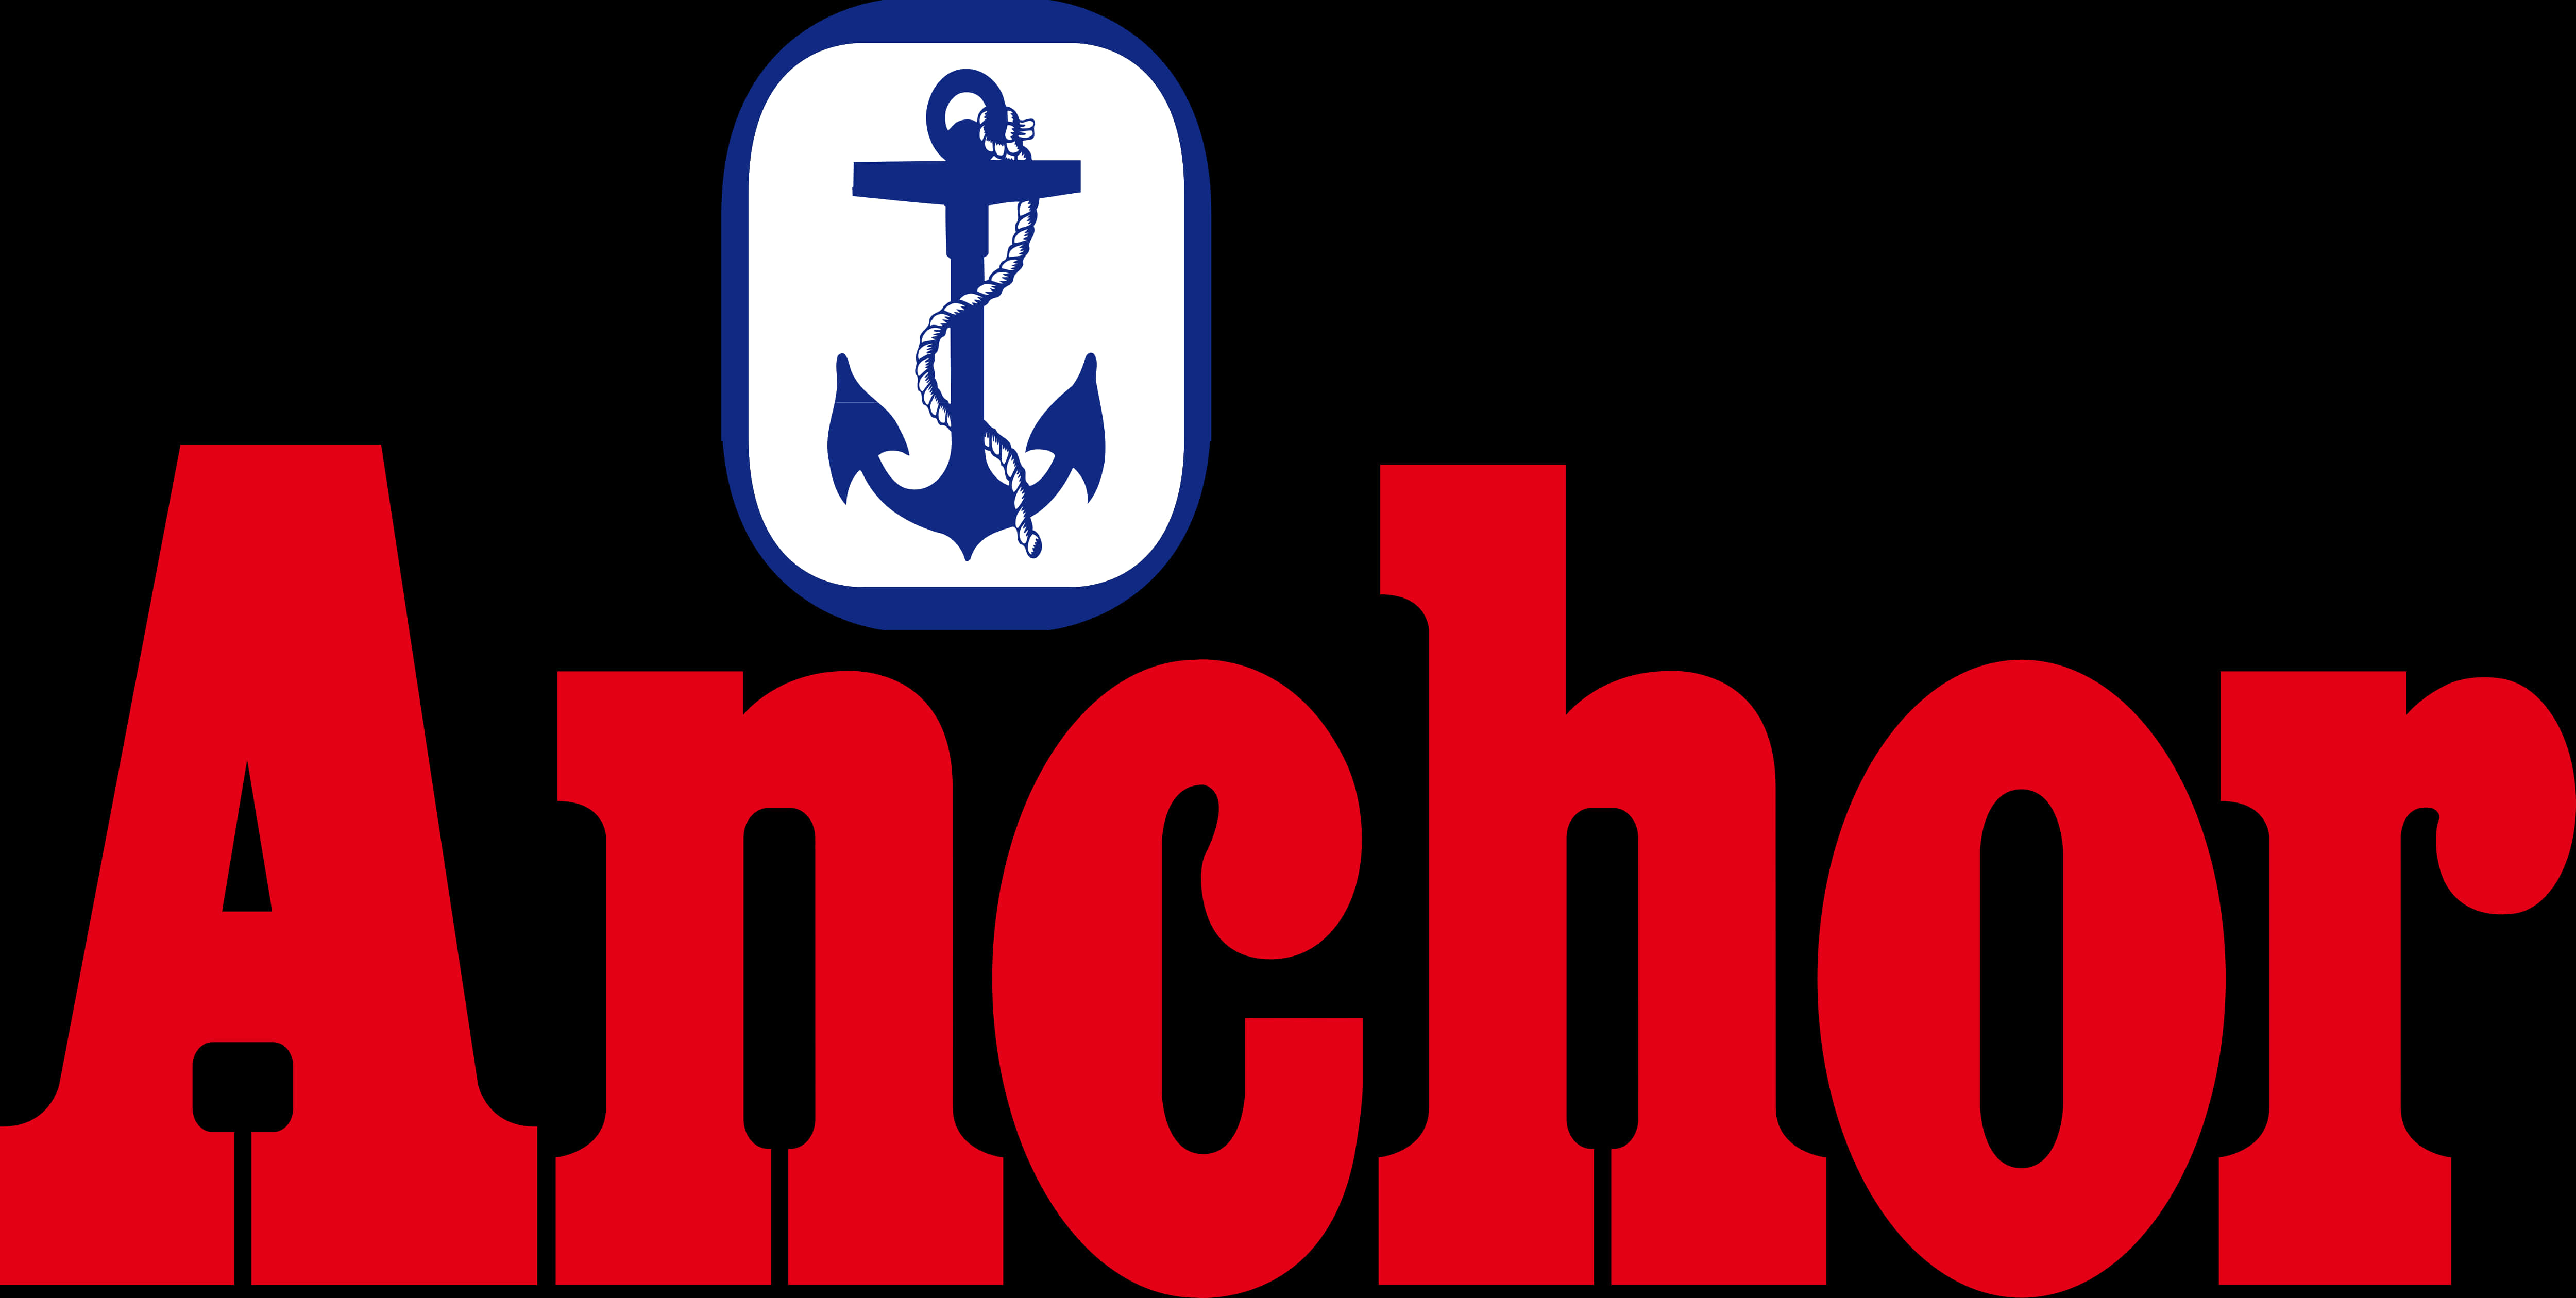 Anchor Light Cheddar - Anchor, Hd Png Download